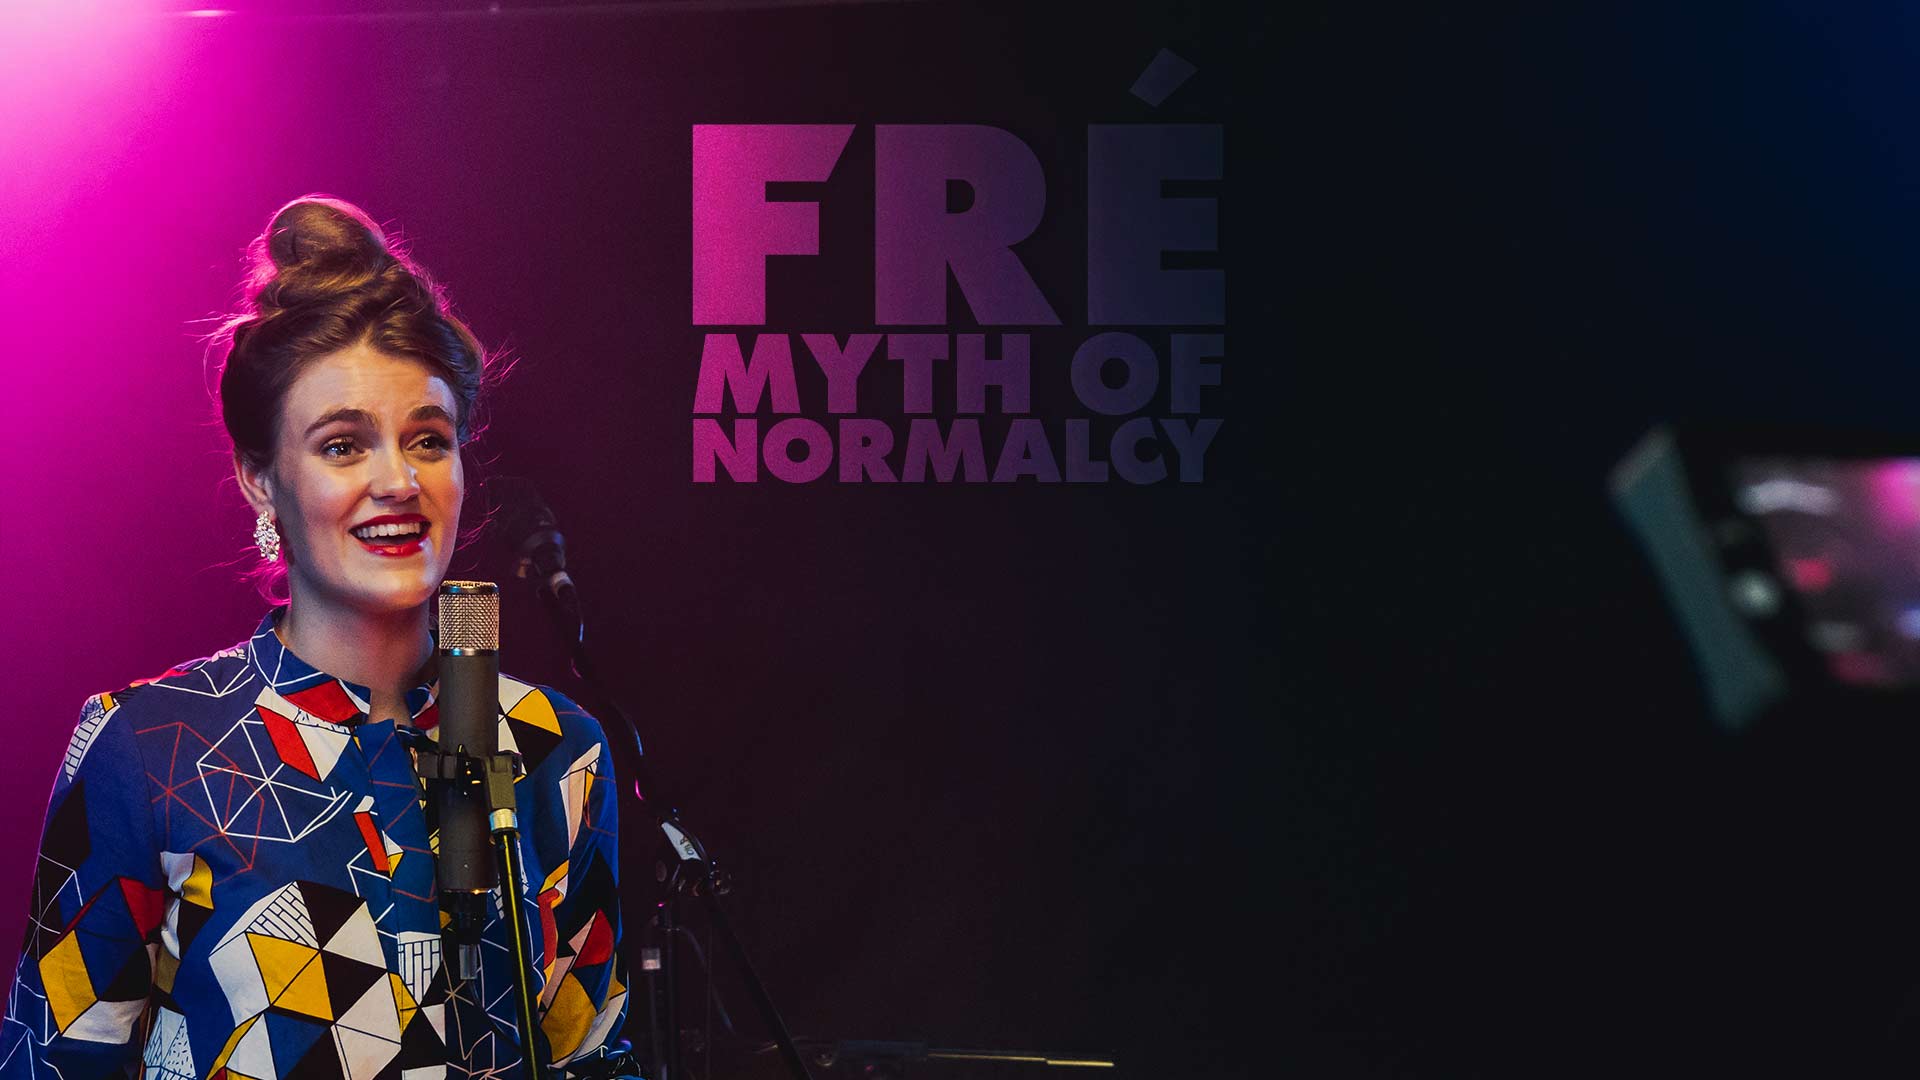 fre-myth-of-normalcy-1920x1080